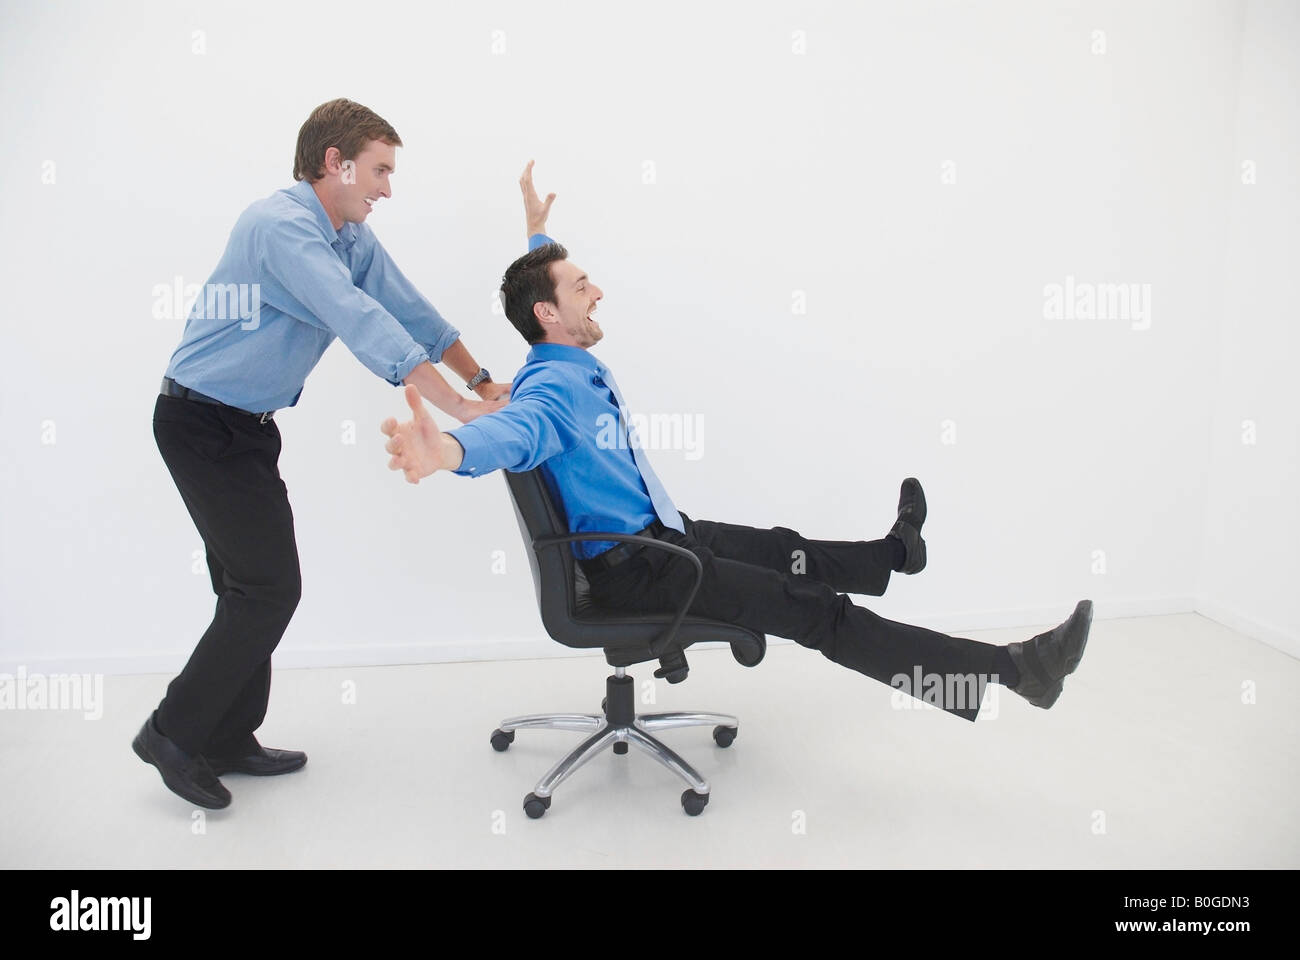 Man pushes man in office chair Stock Photo